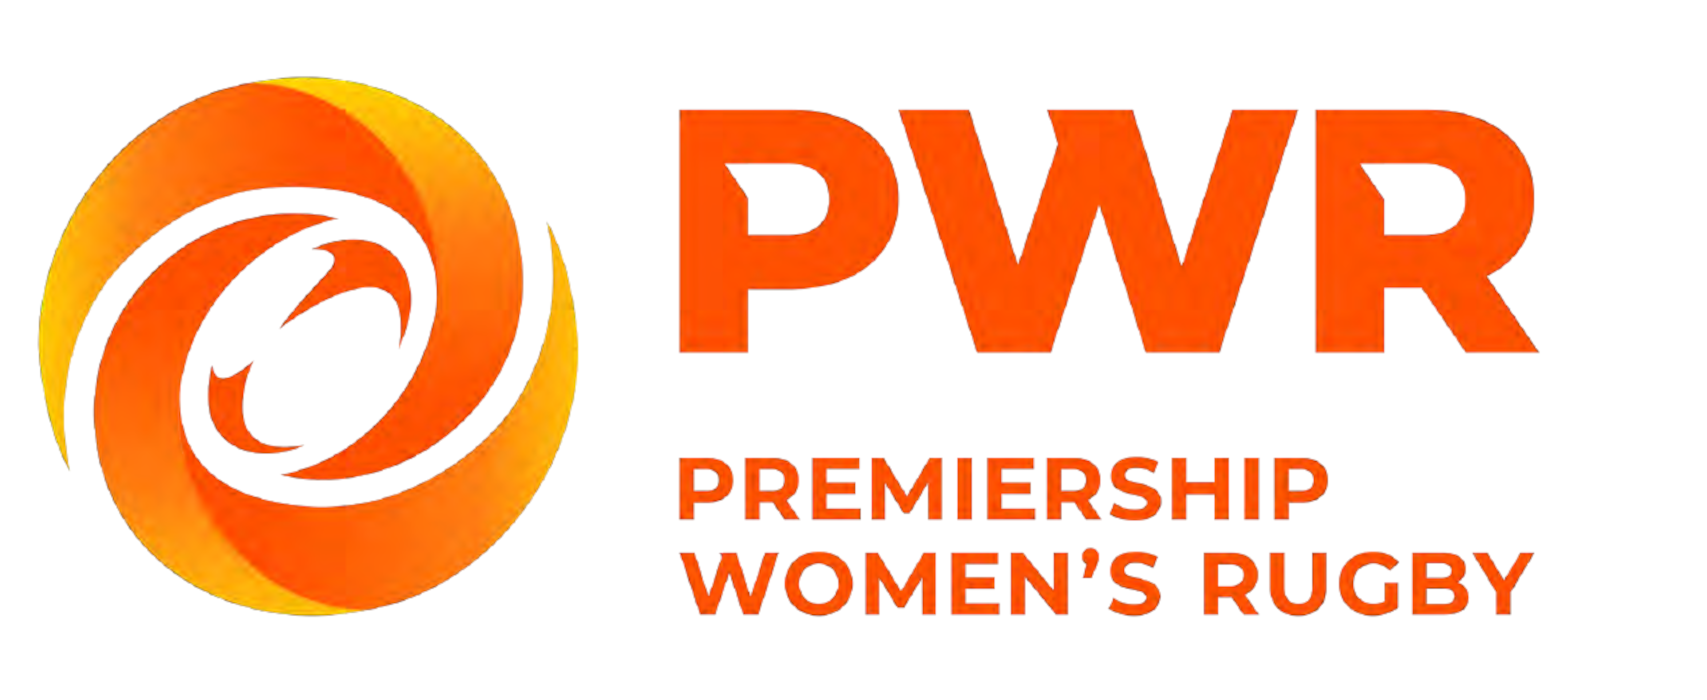 Premiership Womens Rugby launched to kick off a new era for womens rugby in England